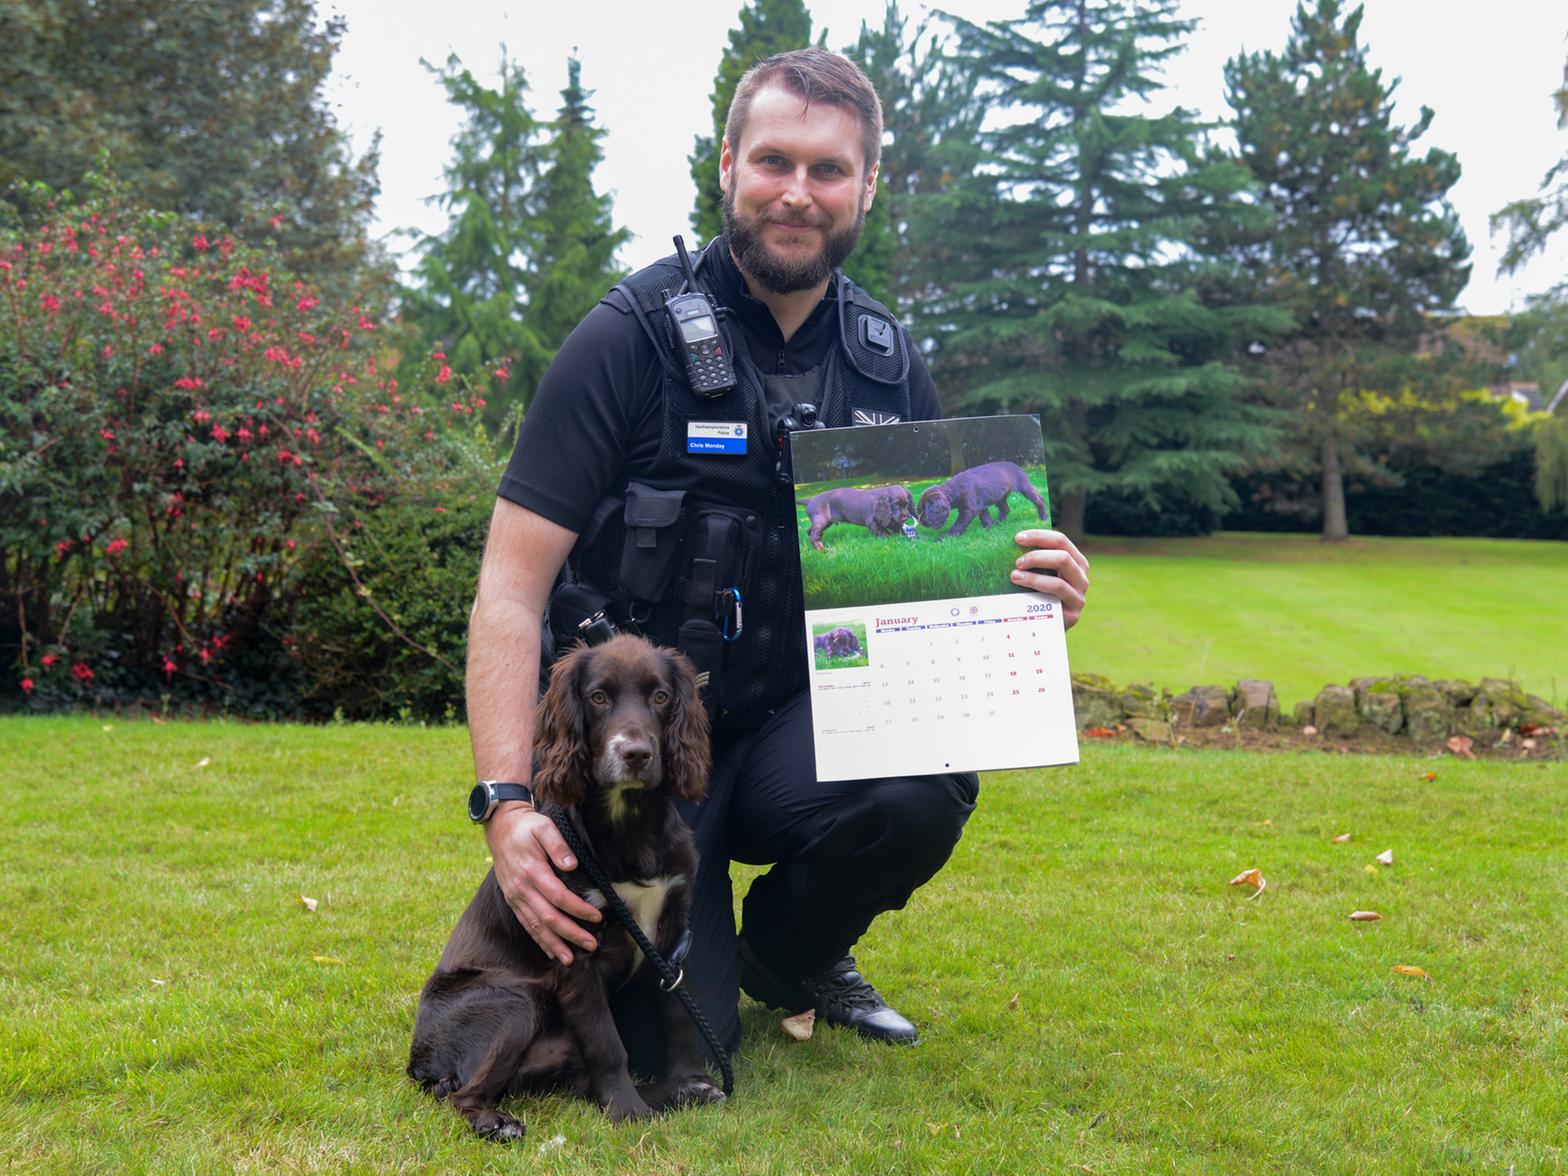 Cash raised from the calendars will be used to train two new cash, drugs and firearms search dogs - including six-month-old Baxter, pictured.